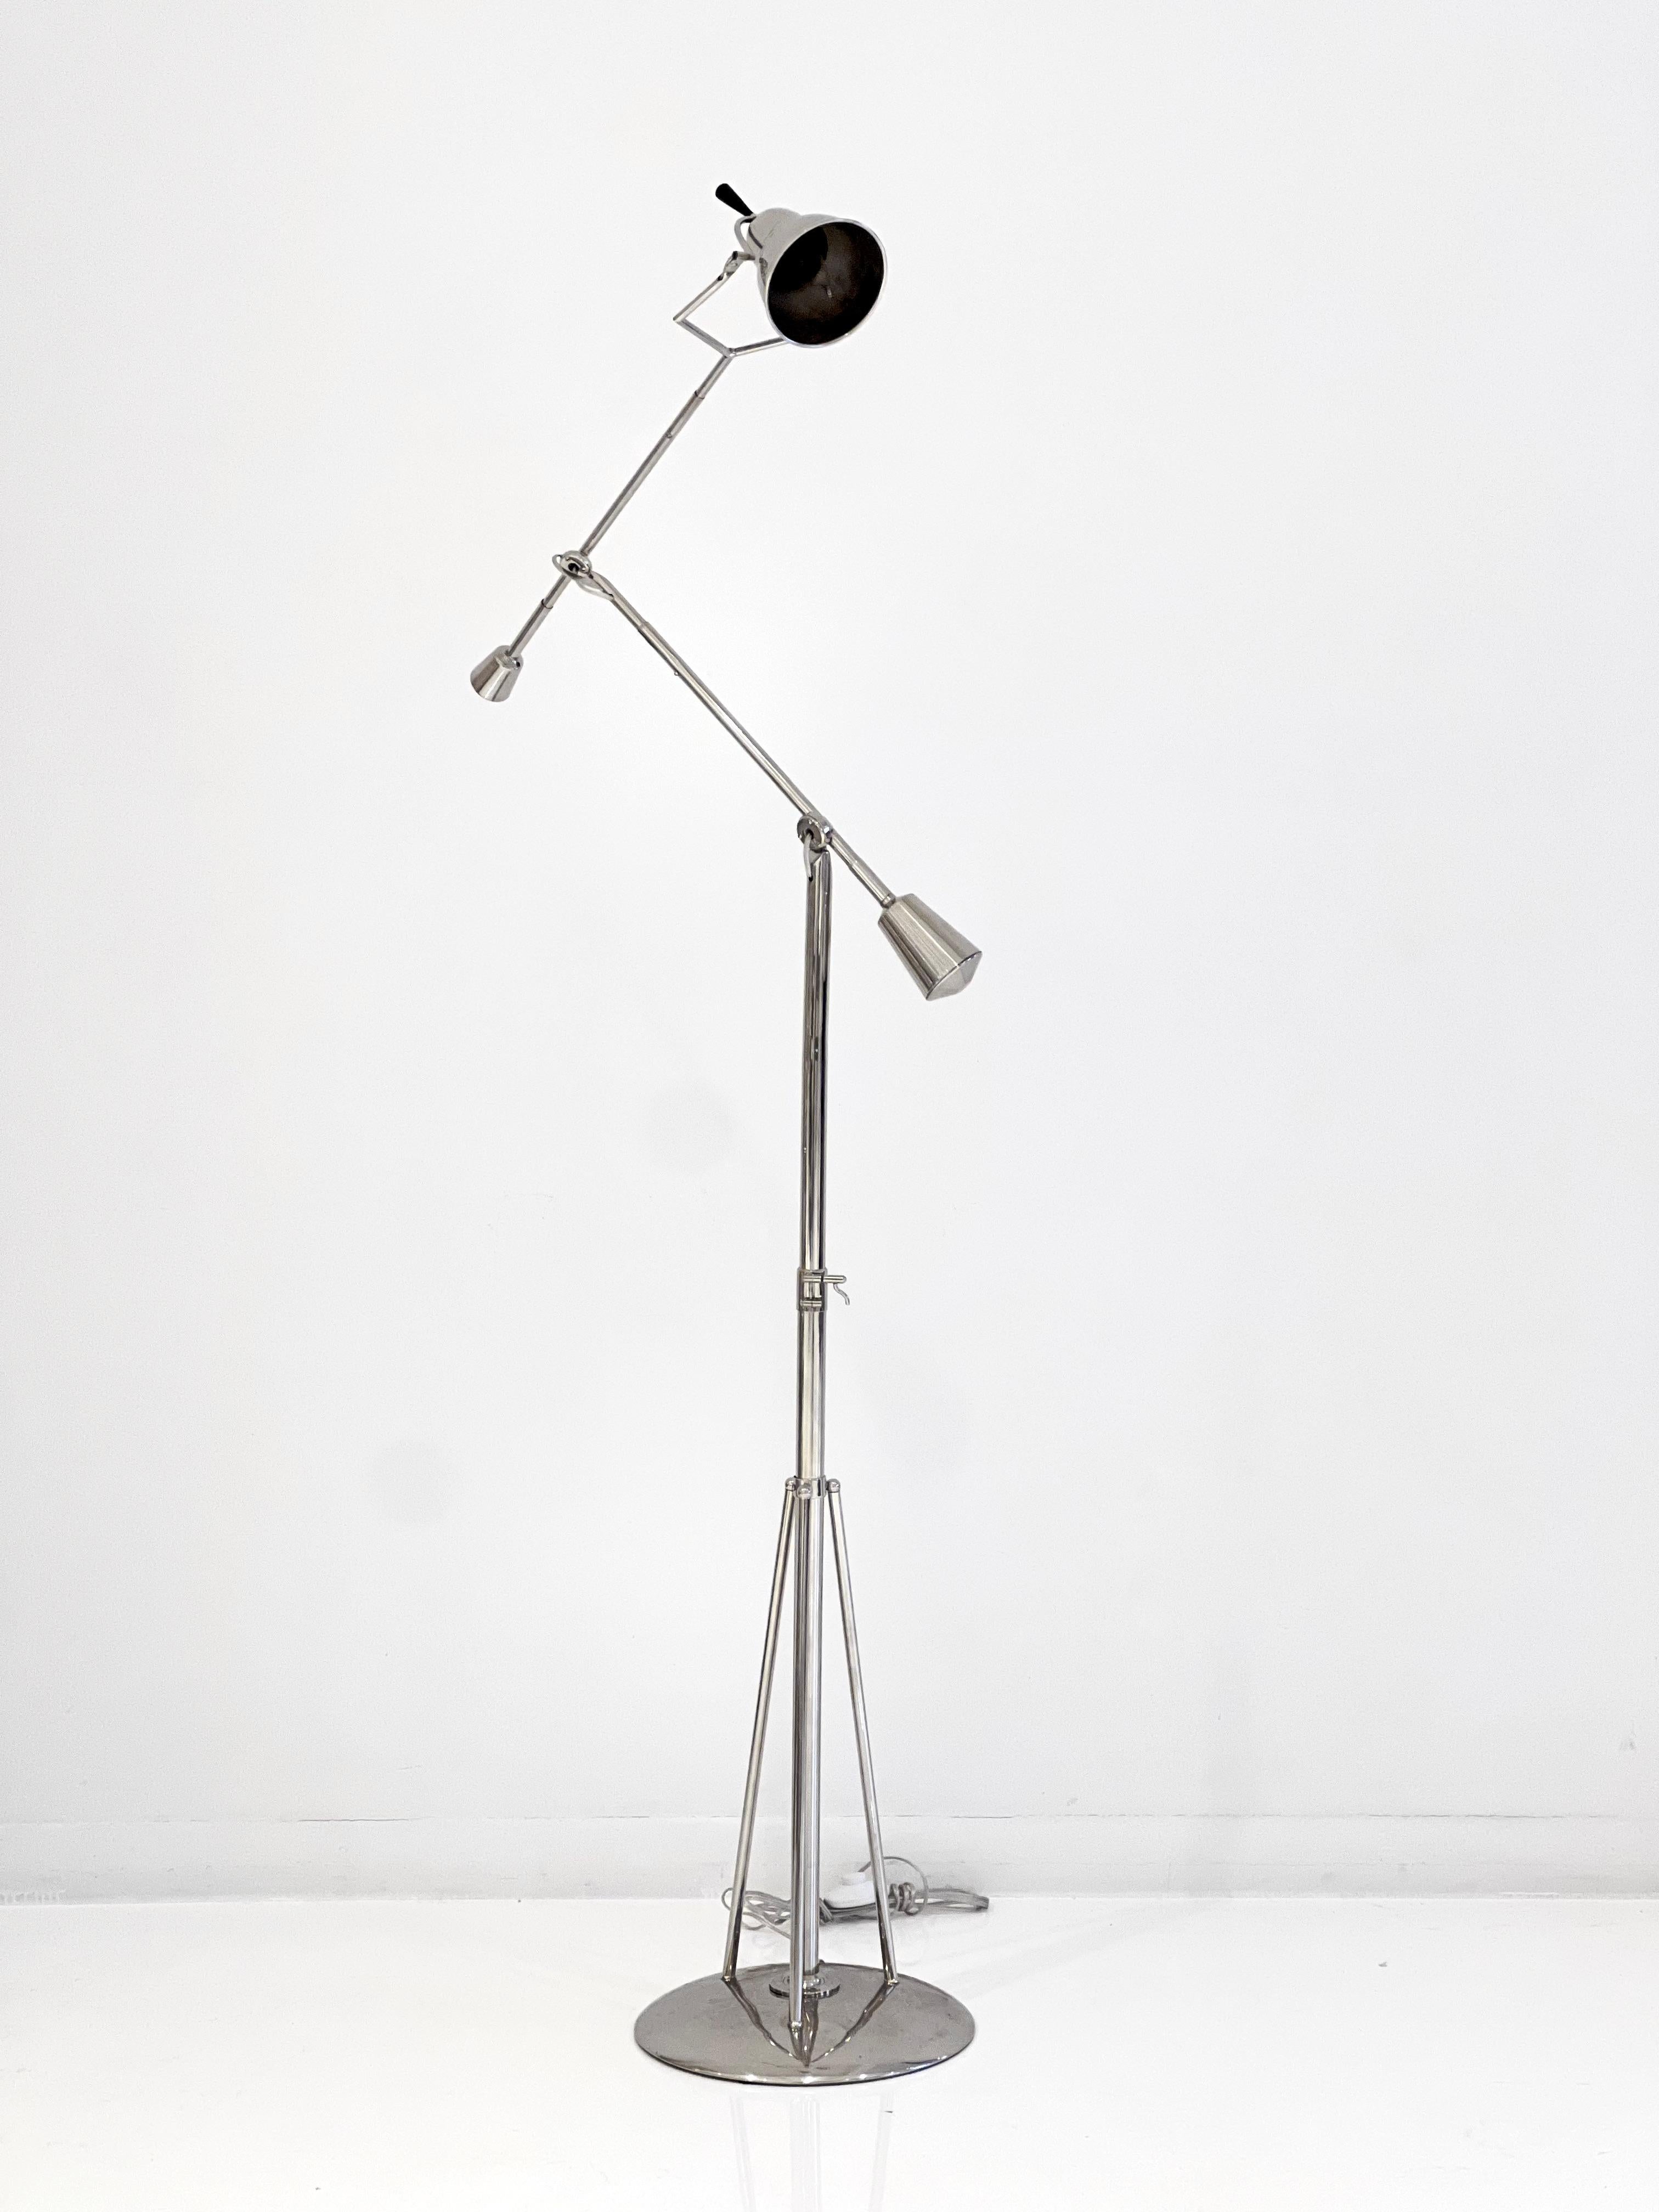 Modernist Bouquet Floor Lamp with adjustable arm, height and various joints, circa 1960s with beautiful polished chrome finish.